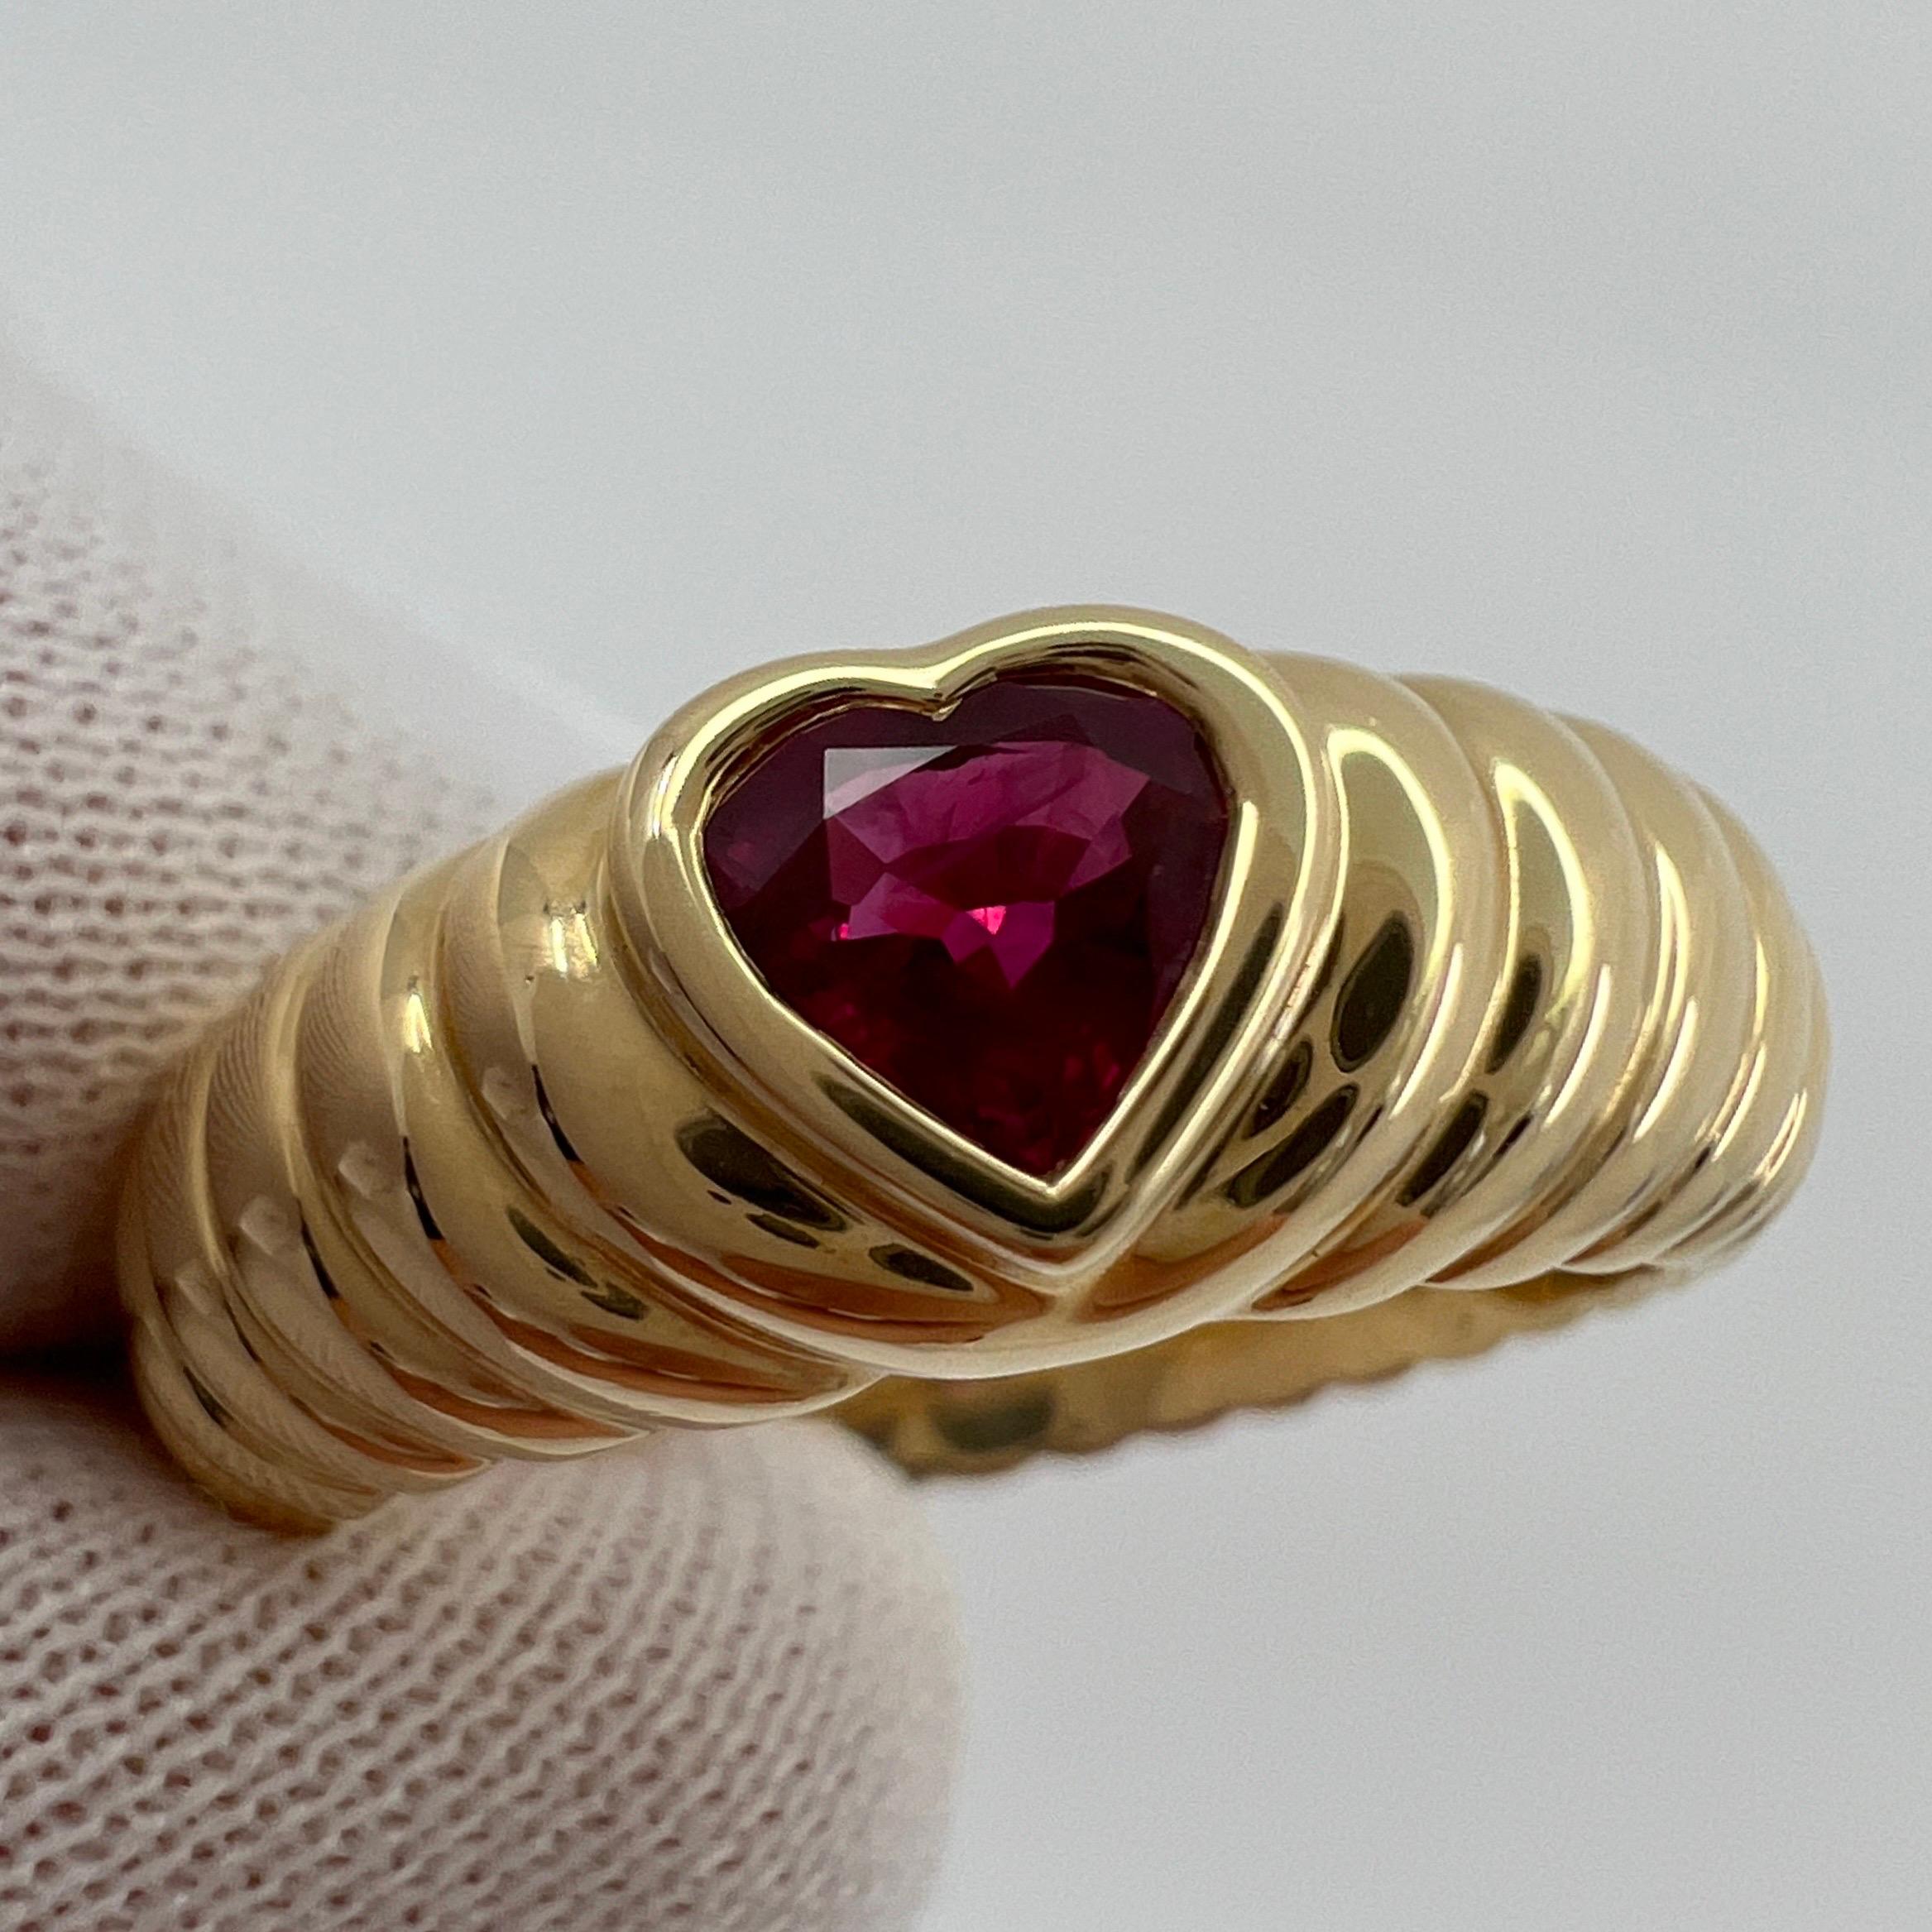 Vintage Tiffany & Co. Vivid Blood Red Ruby Heart Cut 18k Yellow Gold Band Ring 5